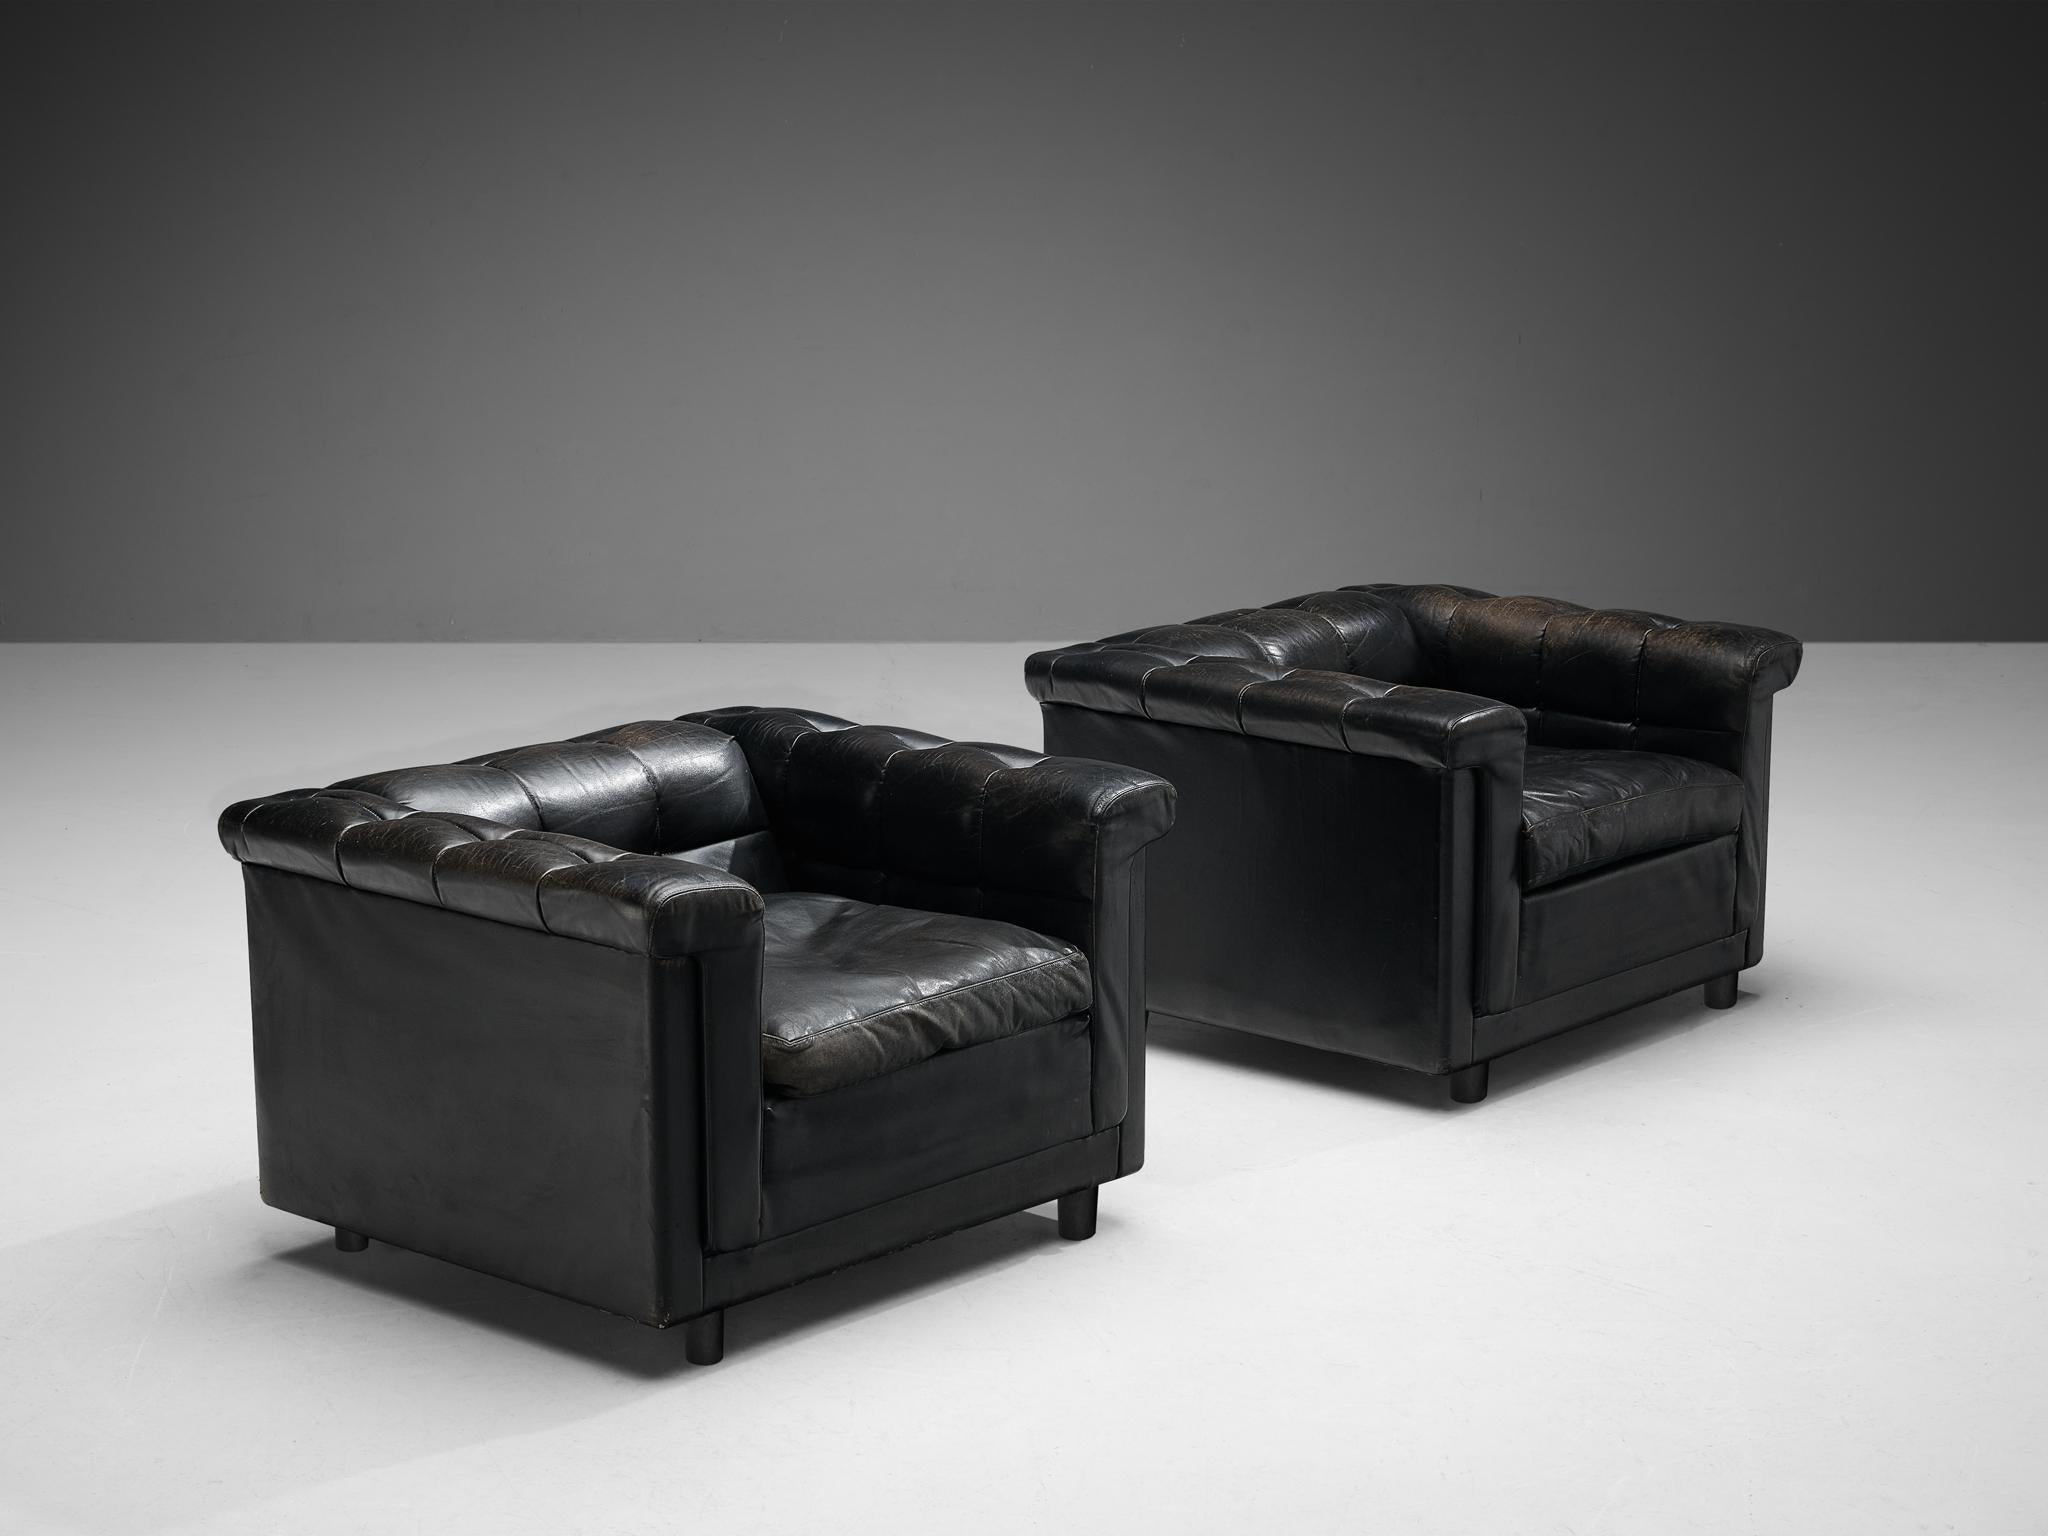 Pair of lounge chairs, black leather, wood, Northern Europe, 1980s

The design of this pair of lounge chairs is characterized by a cubic frame. When seated you experience a pleasant enclosed feeling. The tufted arm and backrests are appealing and